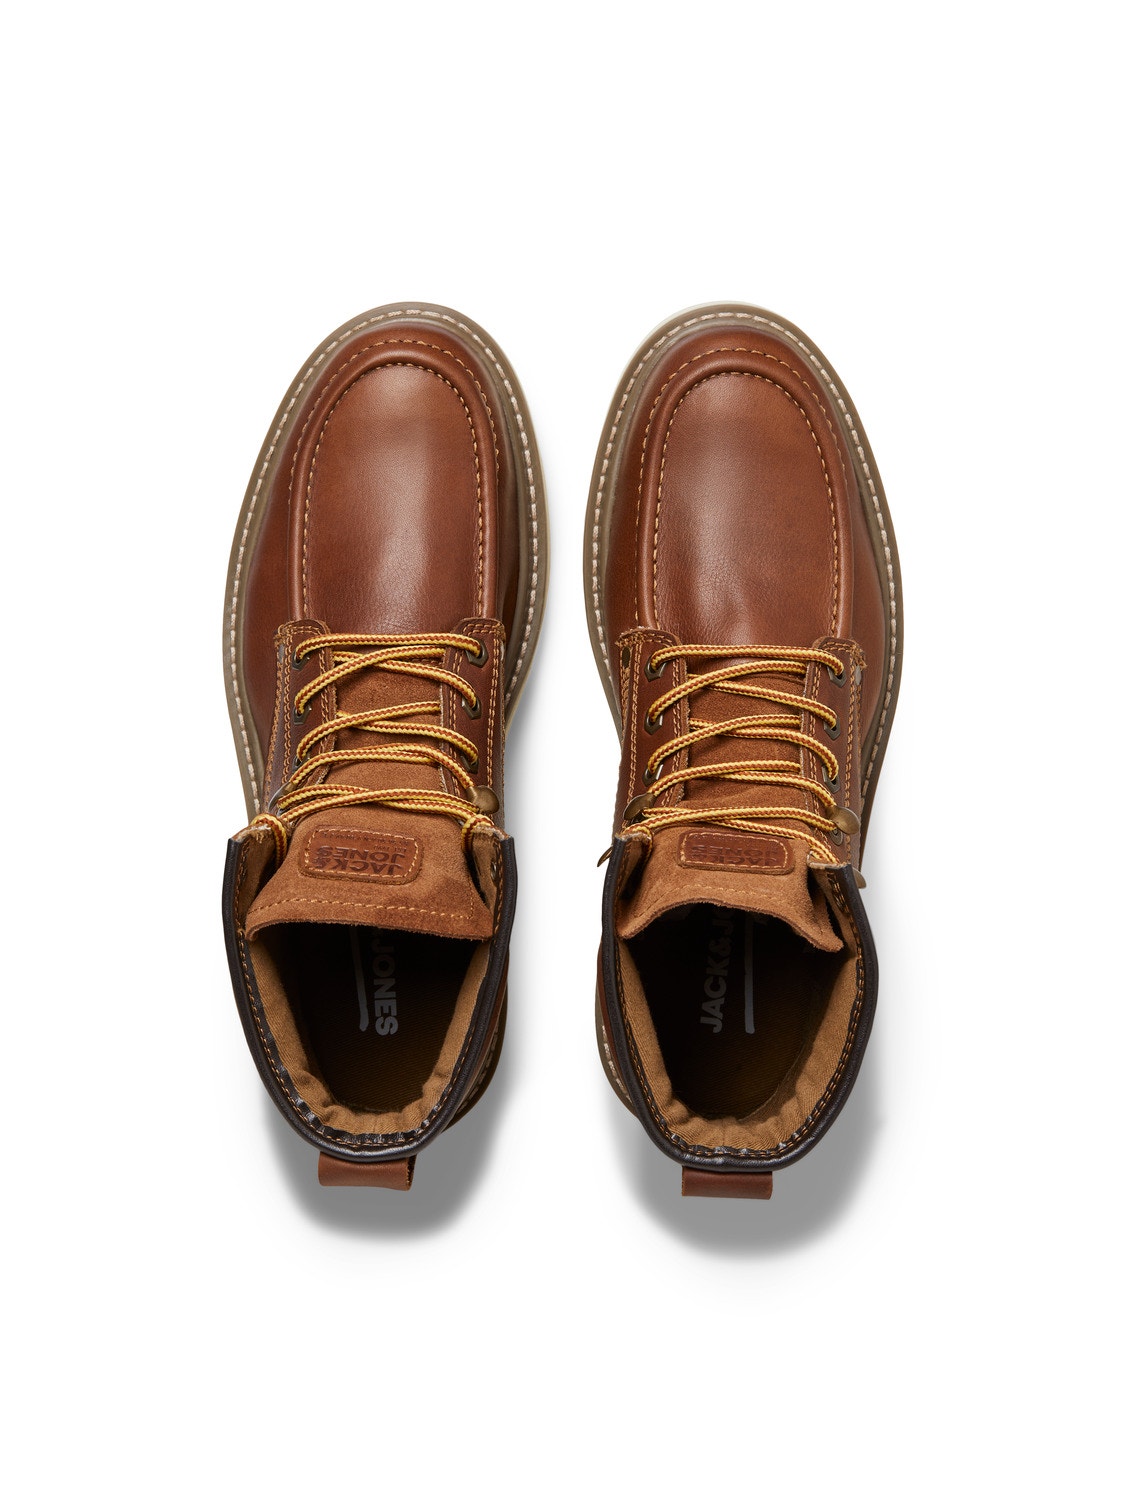 Jack & Jones leather lace up boots with cuff in brown